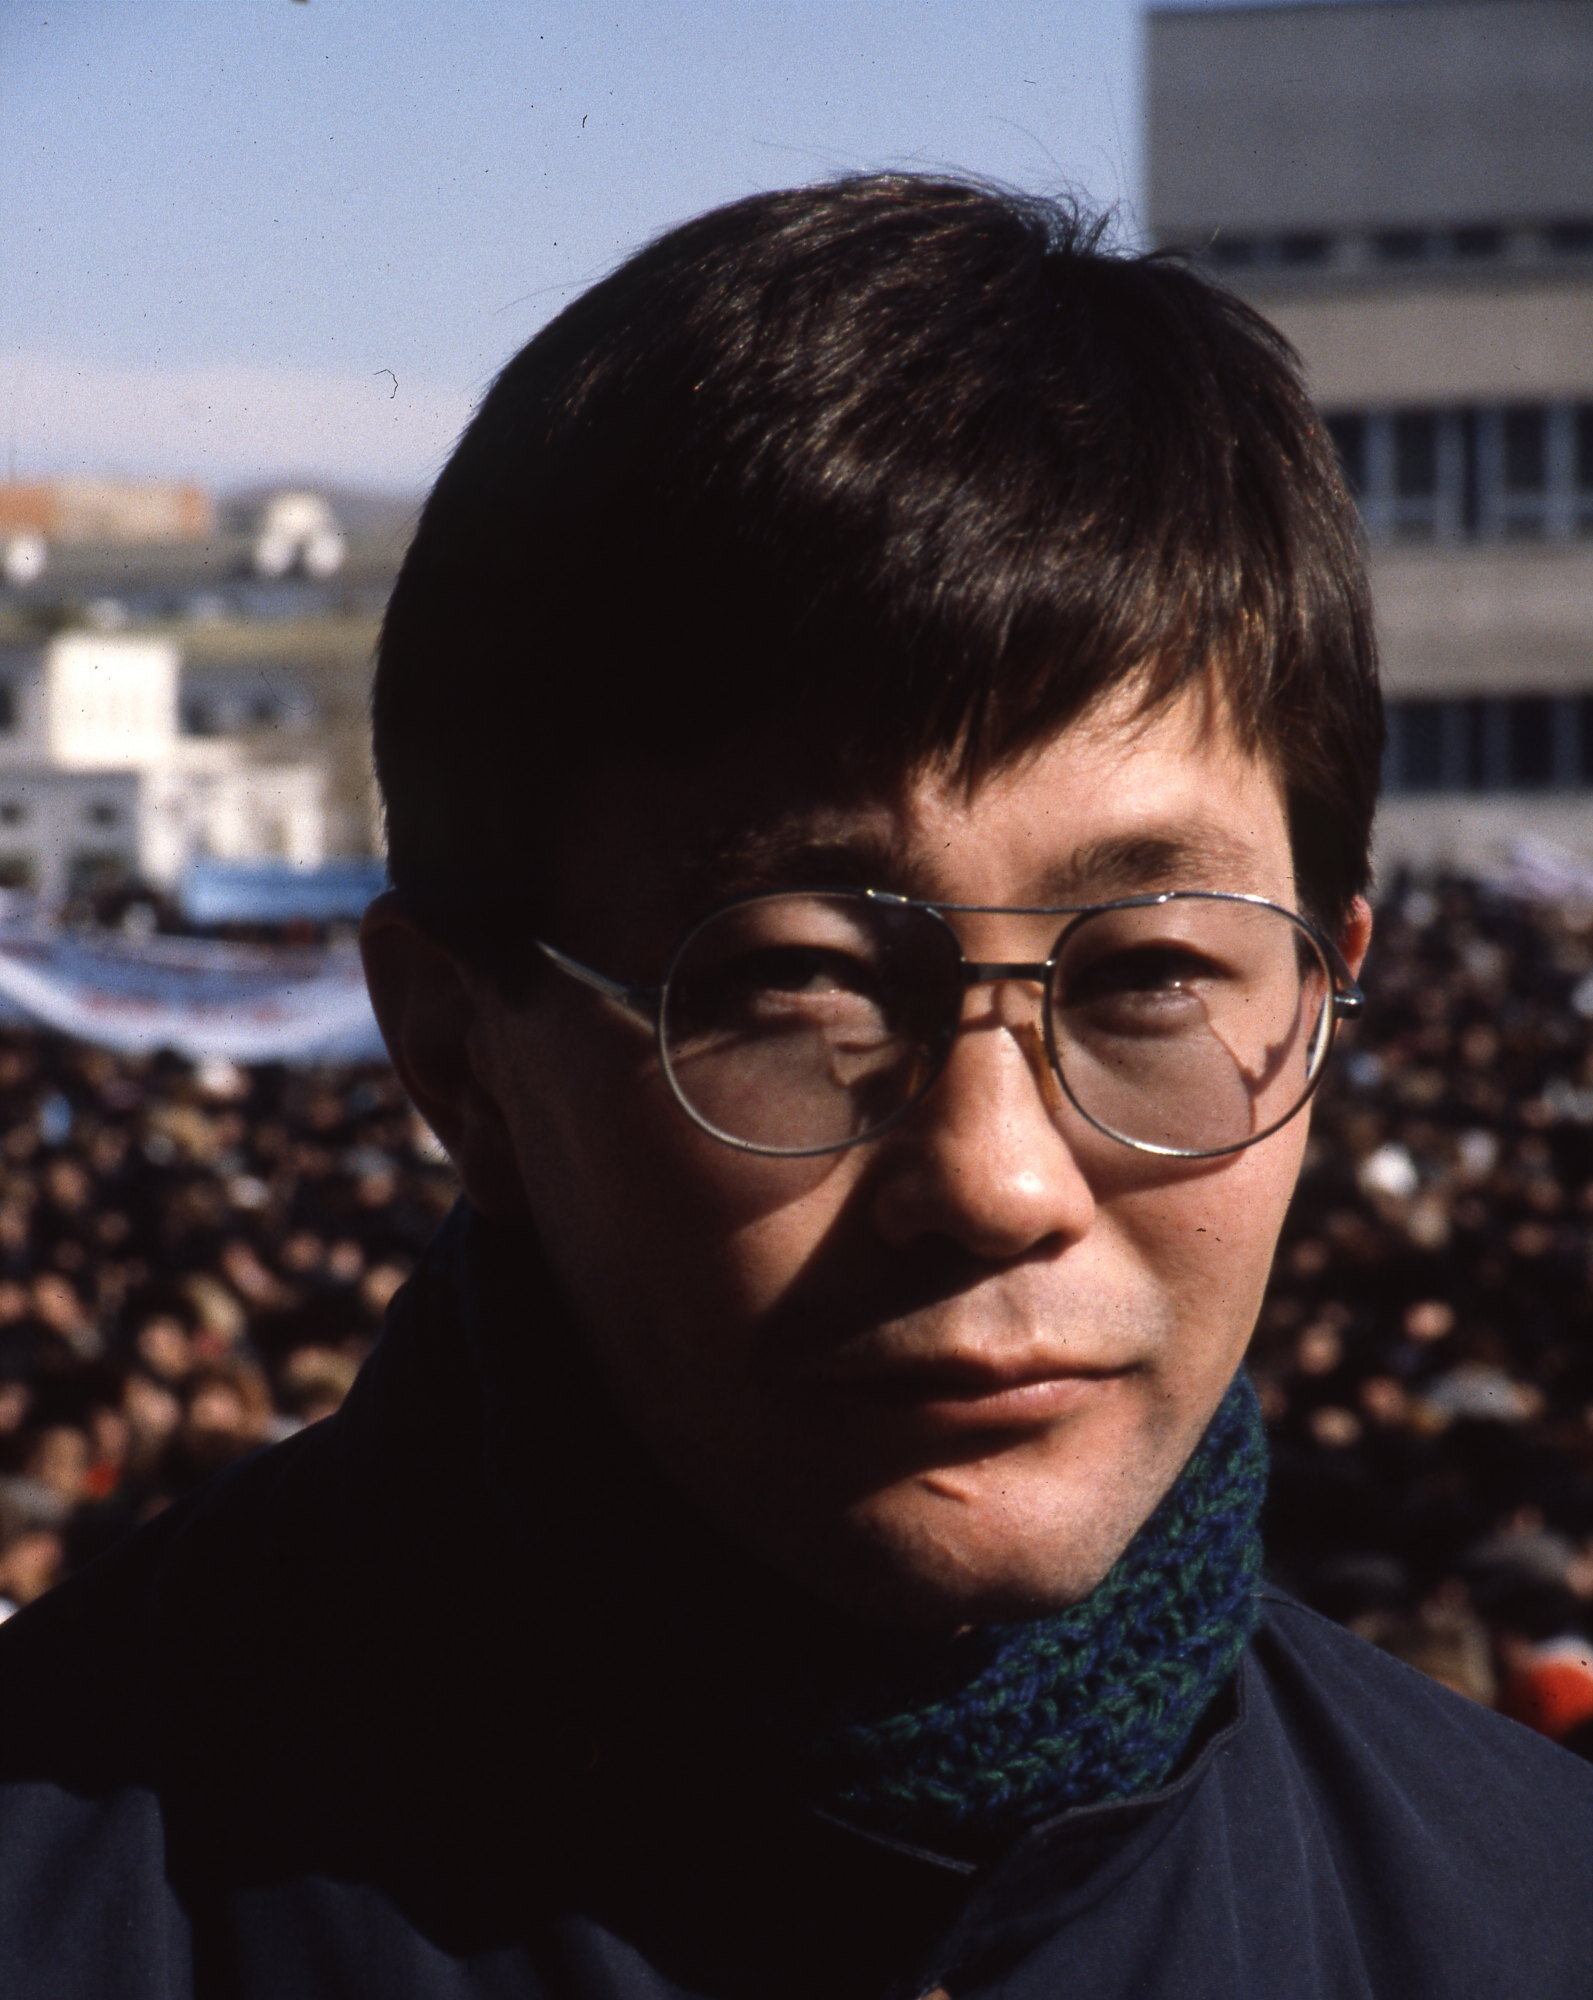 He was called The Golden Swallow of Democracy by the Mongolians. His real name was Sanjaasürengiin Zorig and the leader of the country's 1990 revolution. In 1998 he was assassinated at the age of 36.